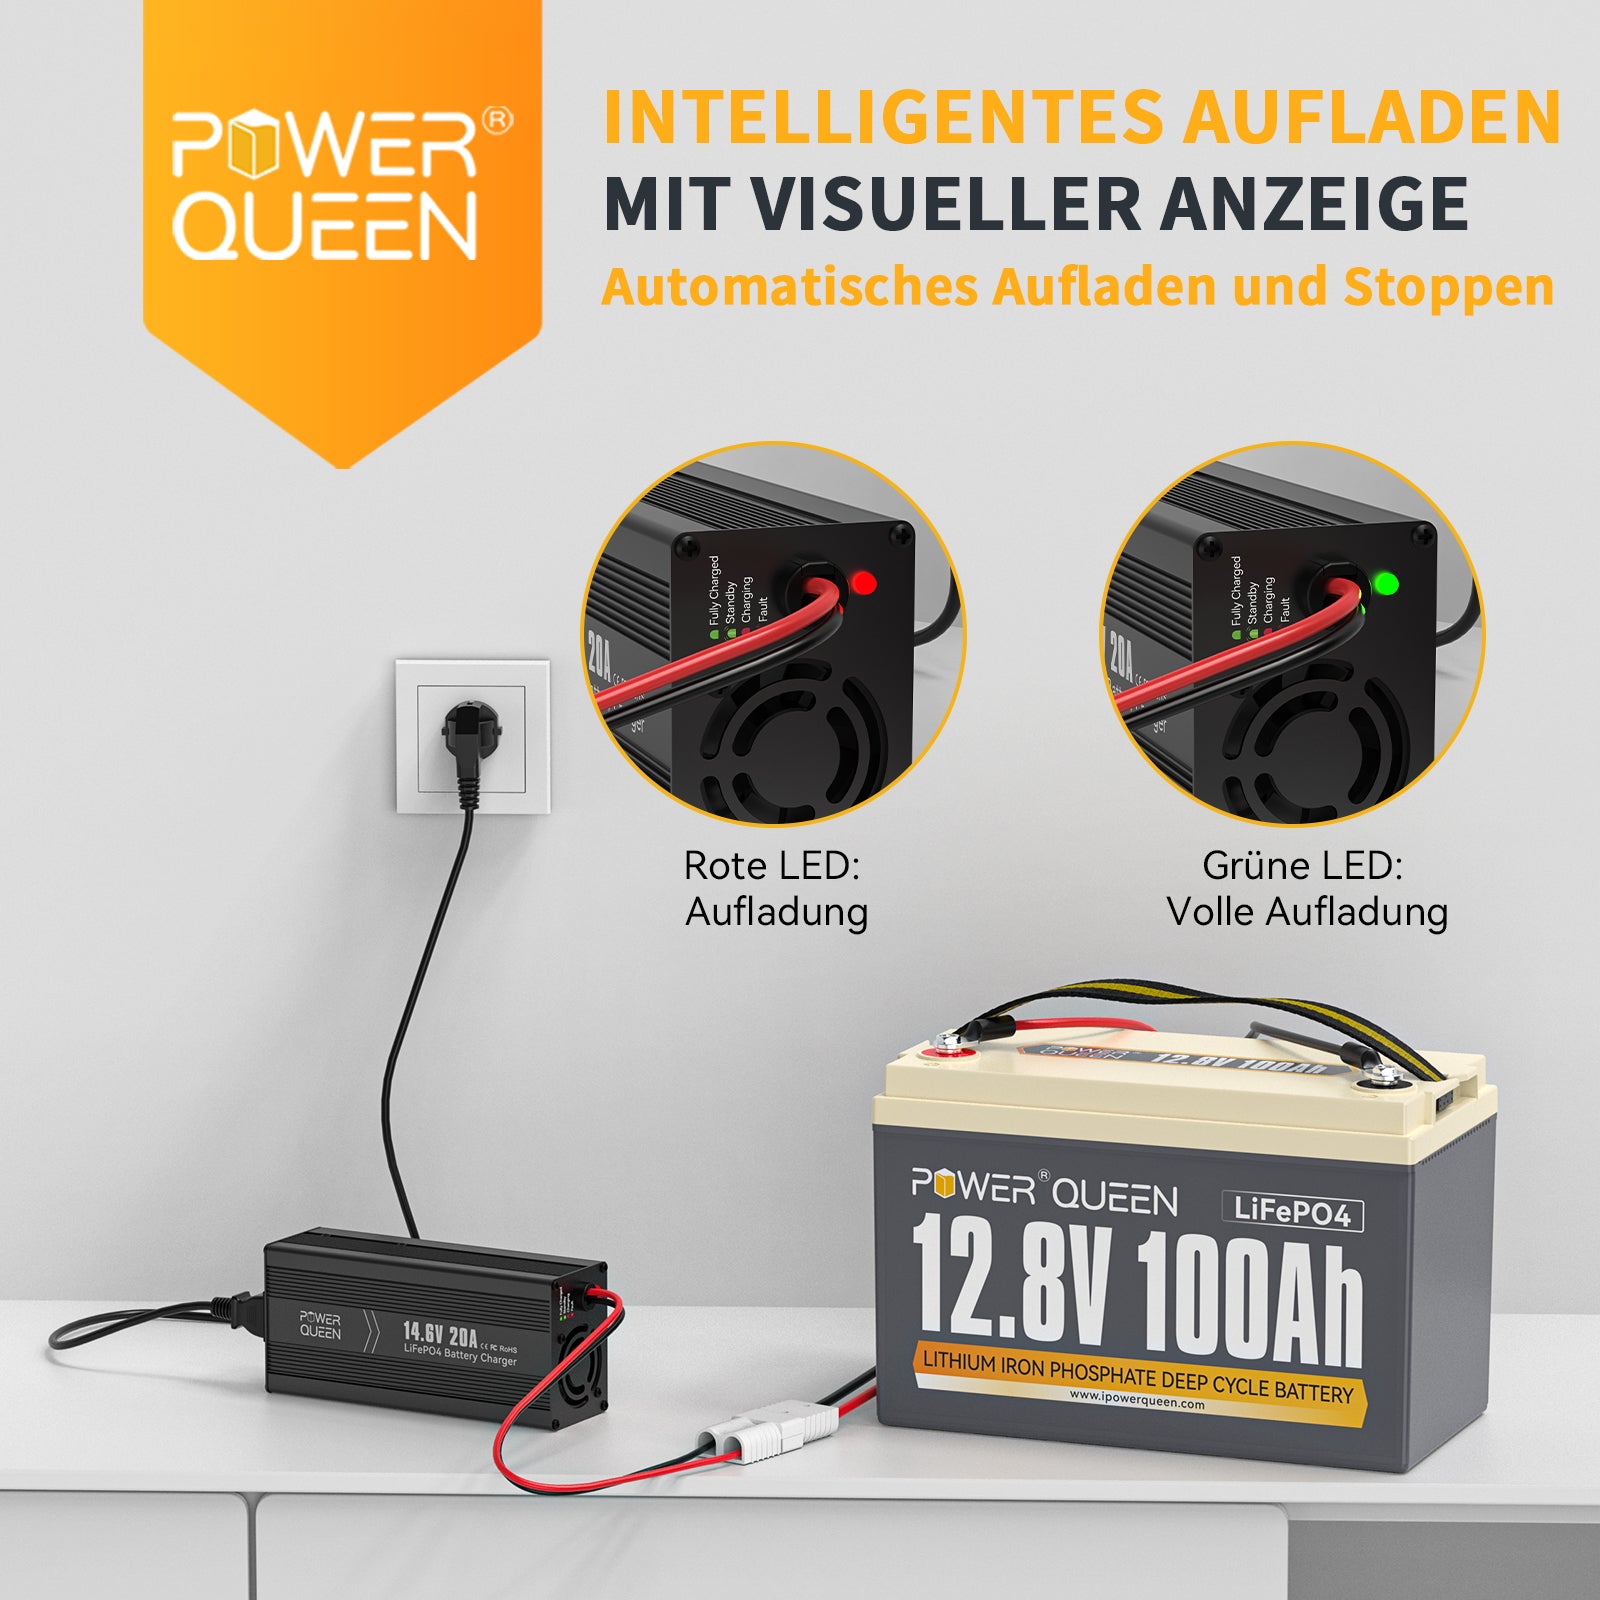 Chargeur Power Queen 14,6 V 20 A LiFePO4